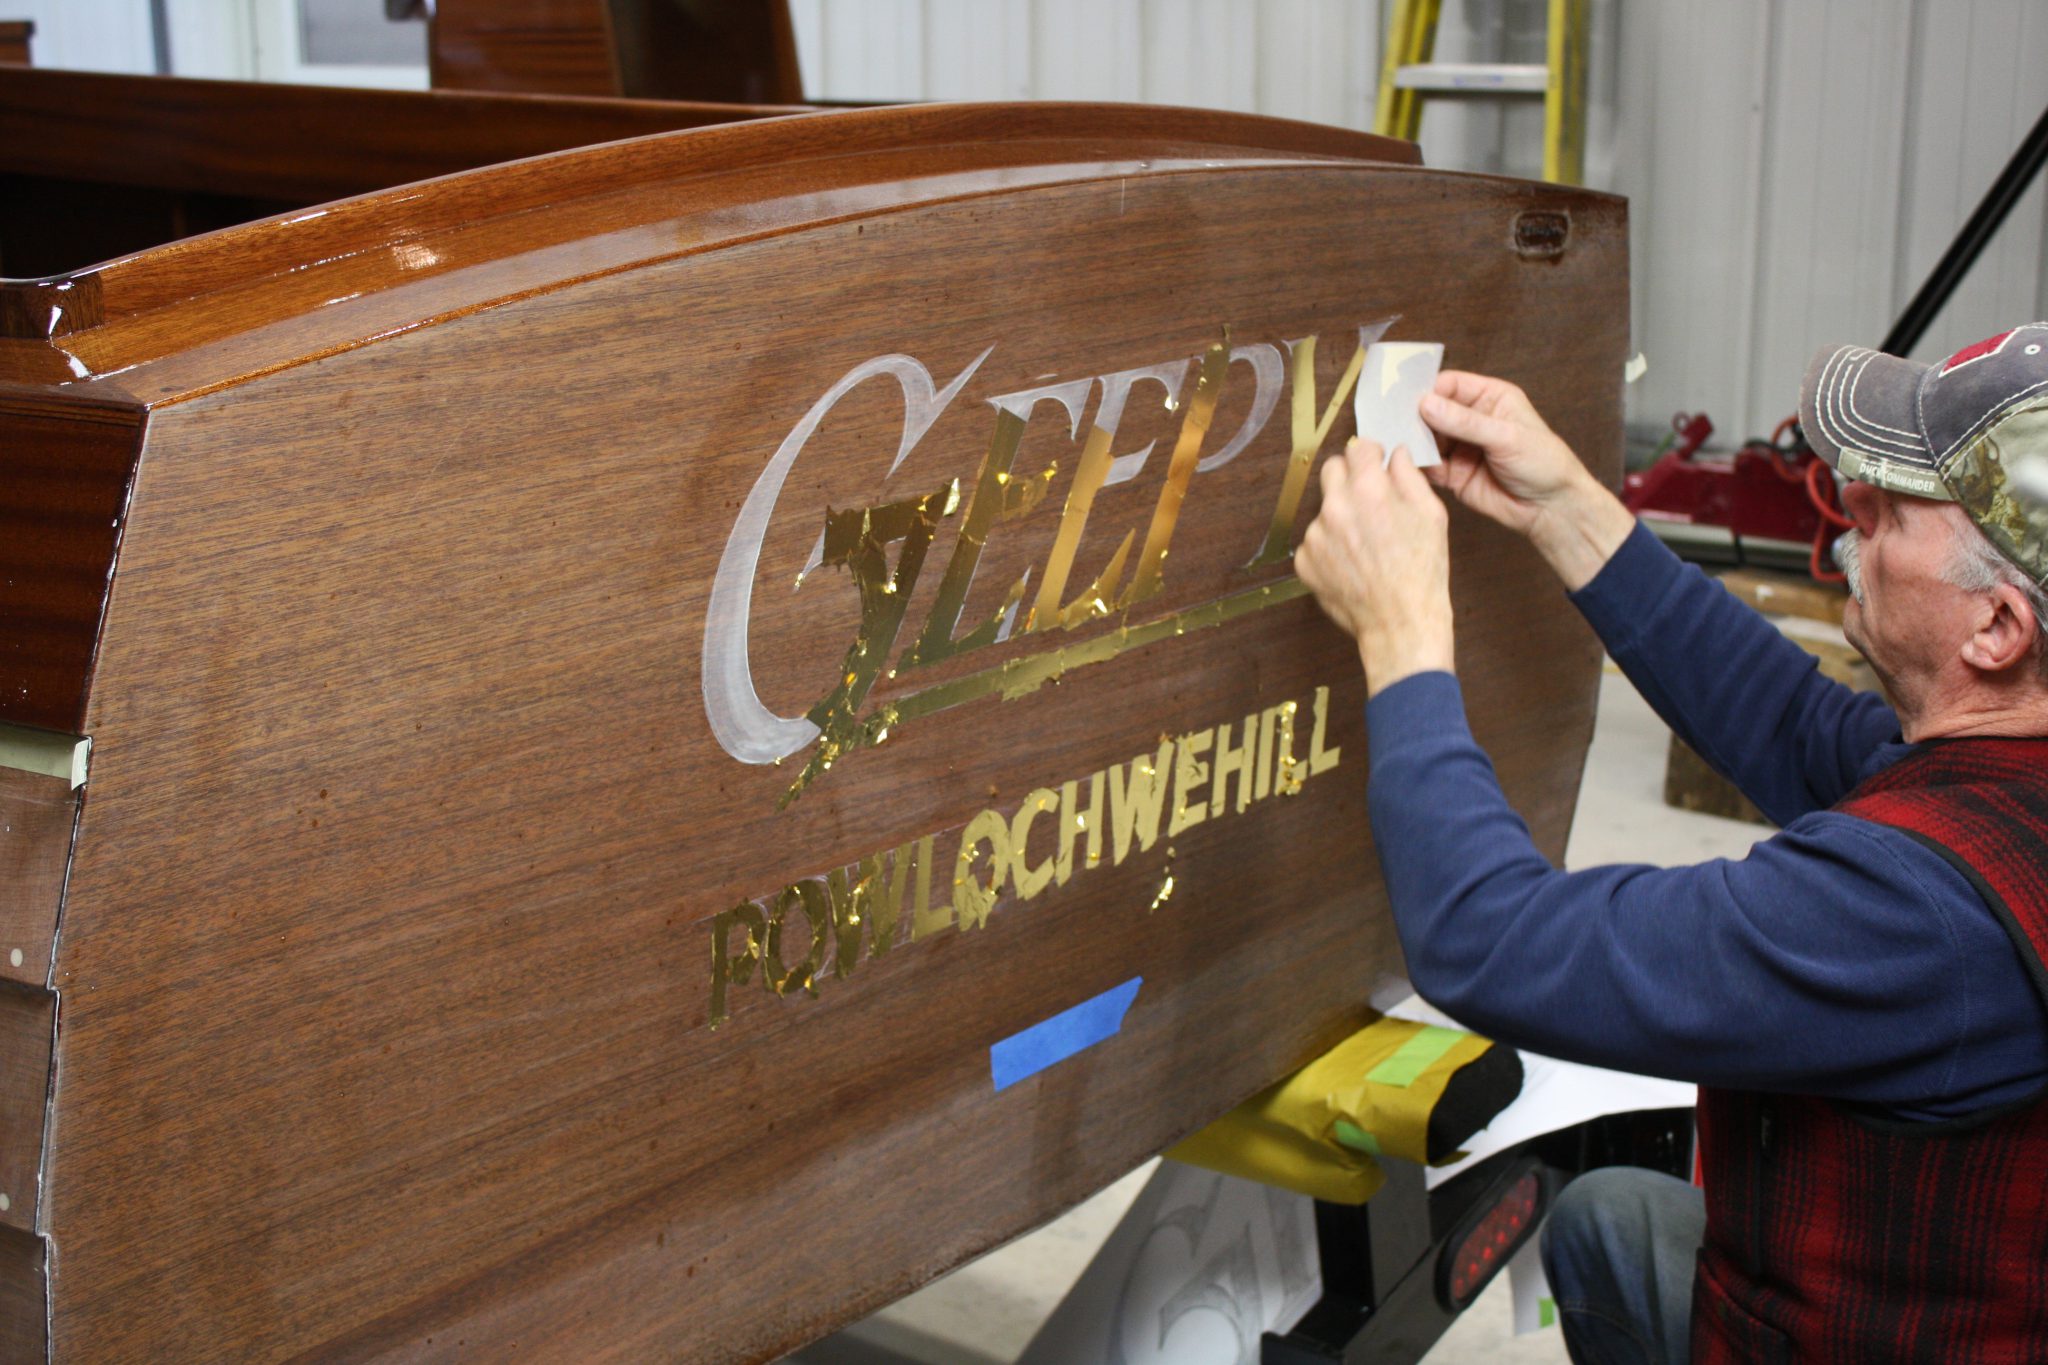 23 karat gold leaf being applied to transom of Geepy